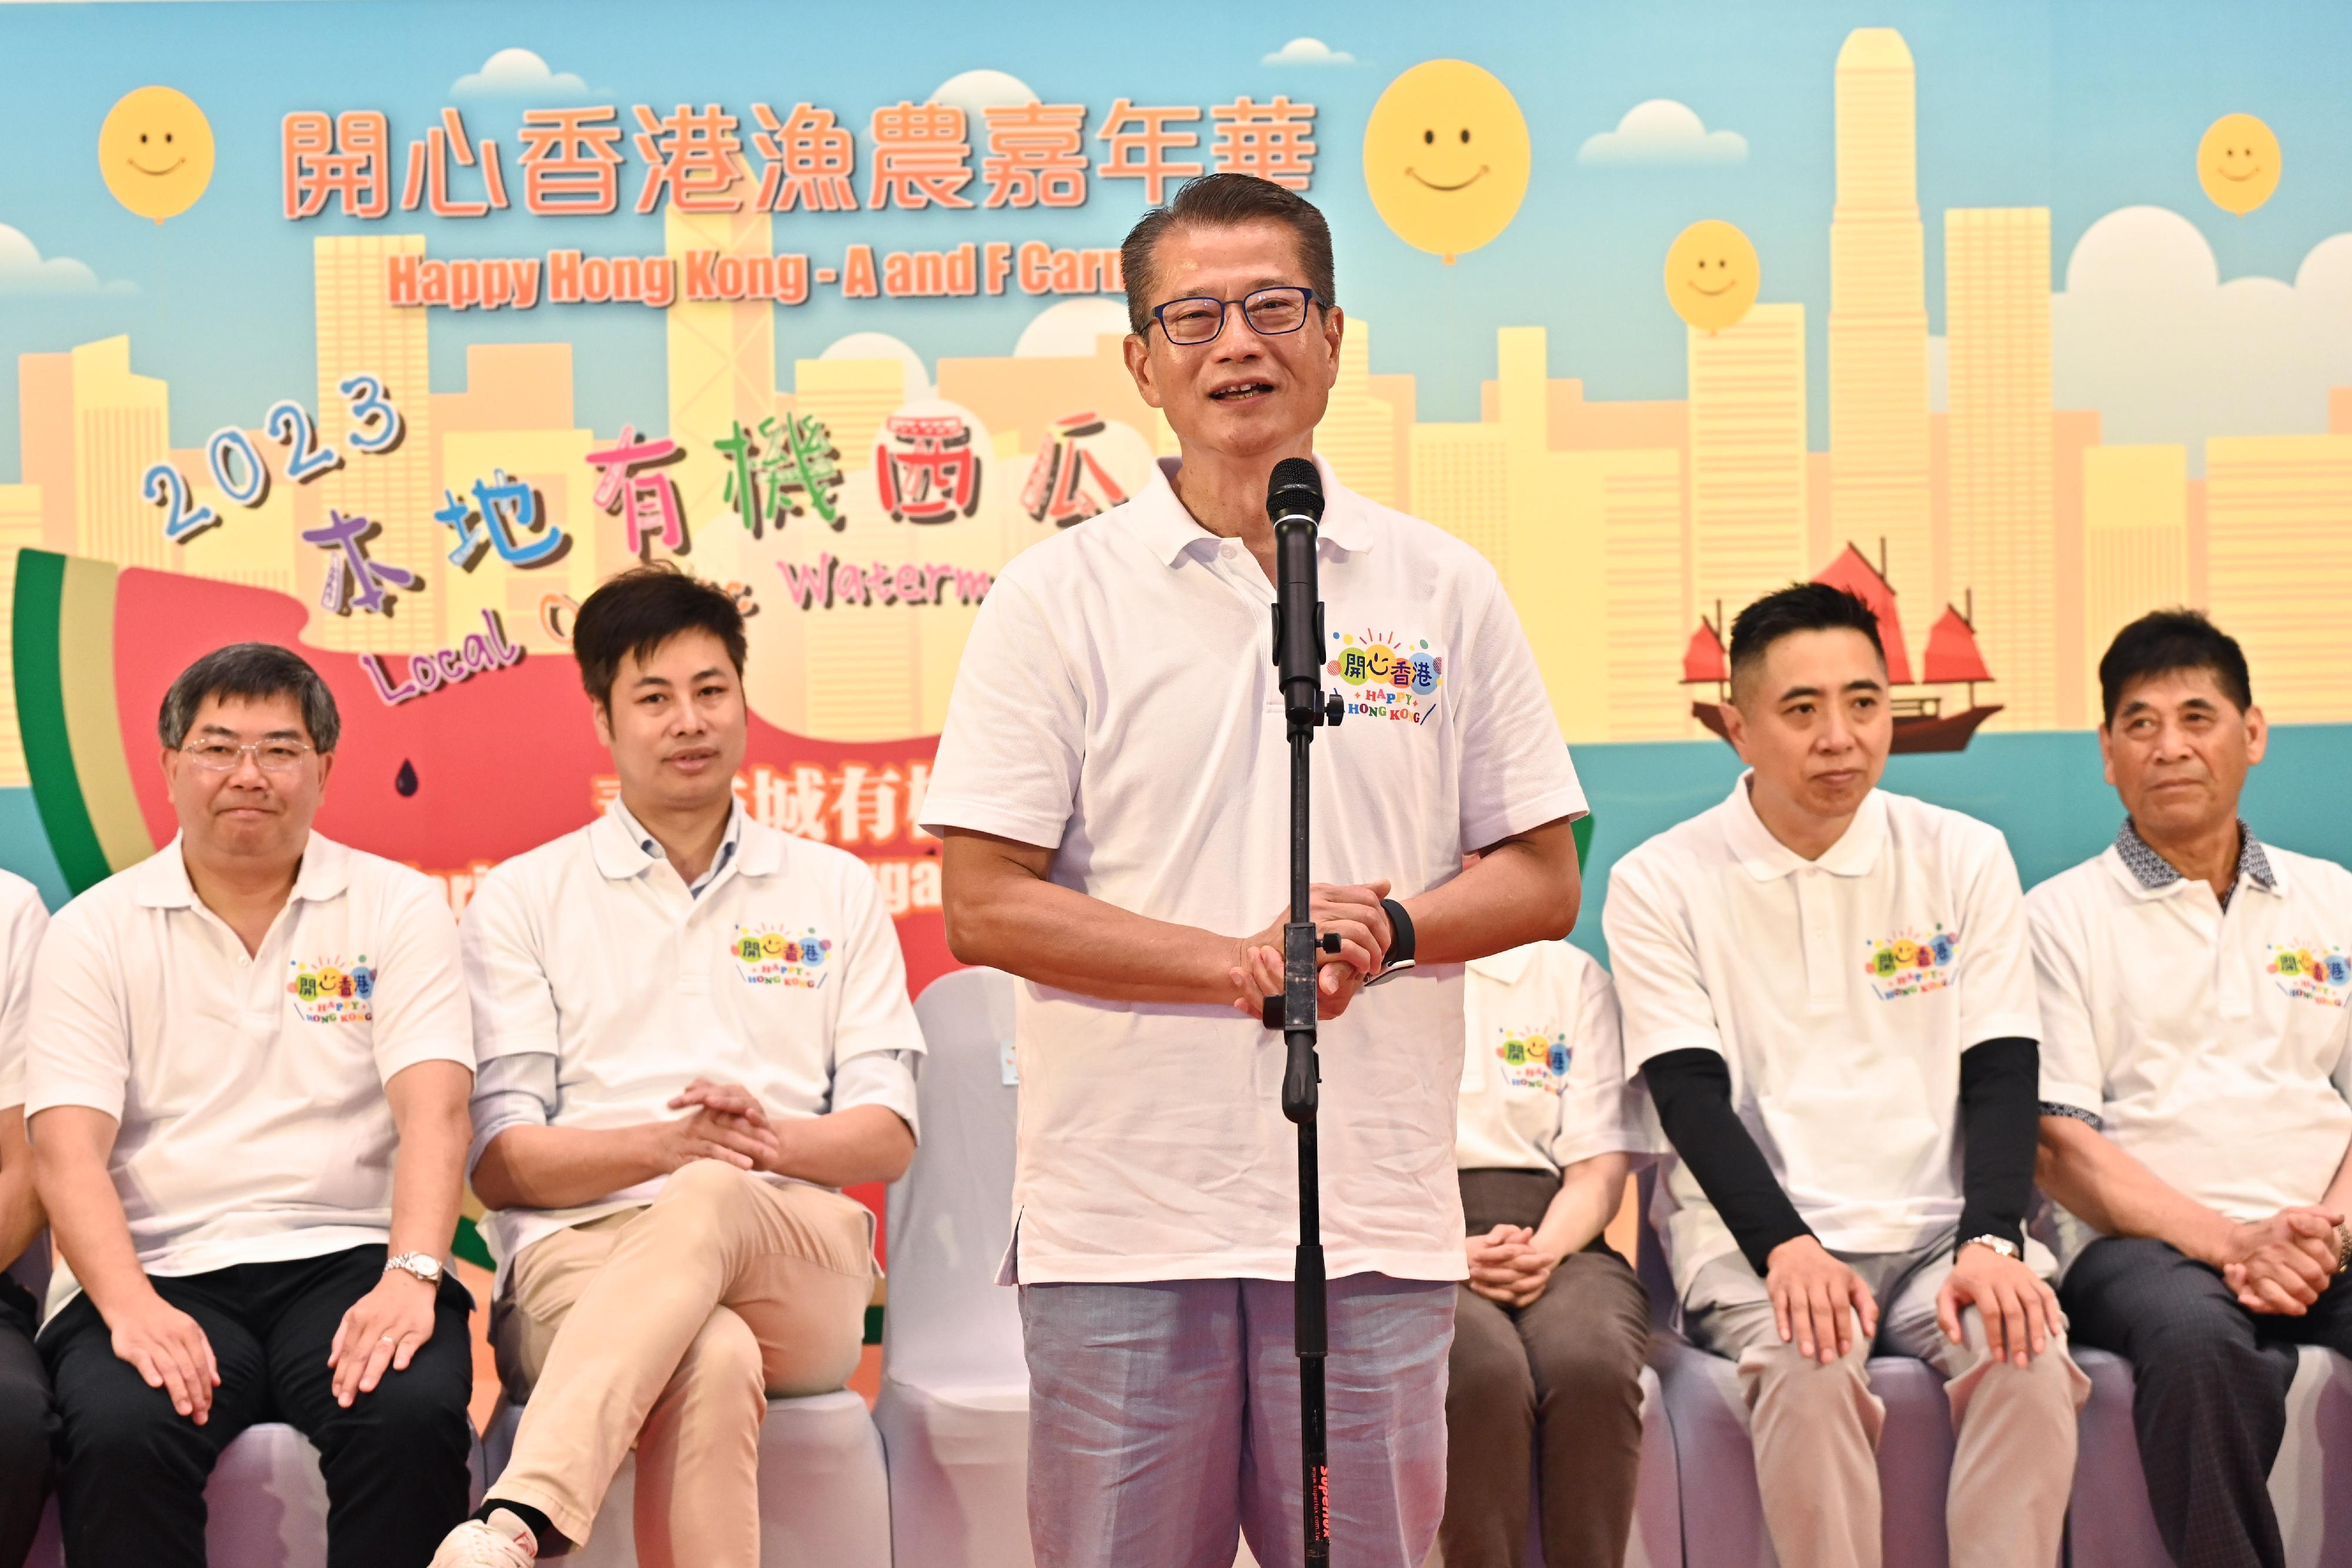 The Financial Secretary, Mr Paul Chan, speaks at the opening ceremony of the Happy Hong Kong - A and F Carnival: Local Organic Watermelon Festival 2023 today (June 22). 